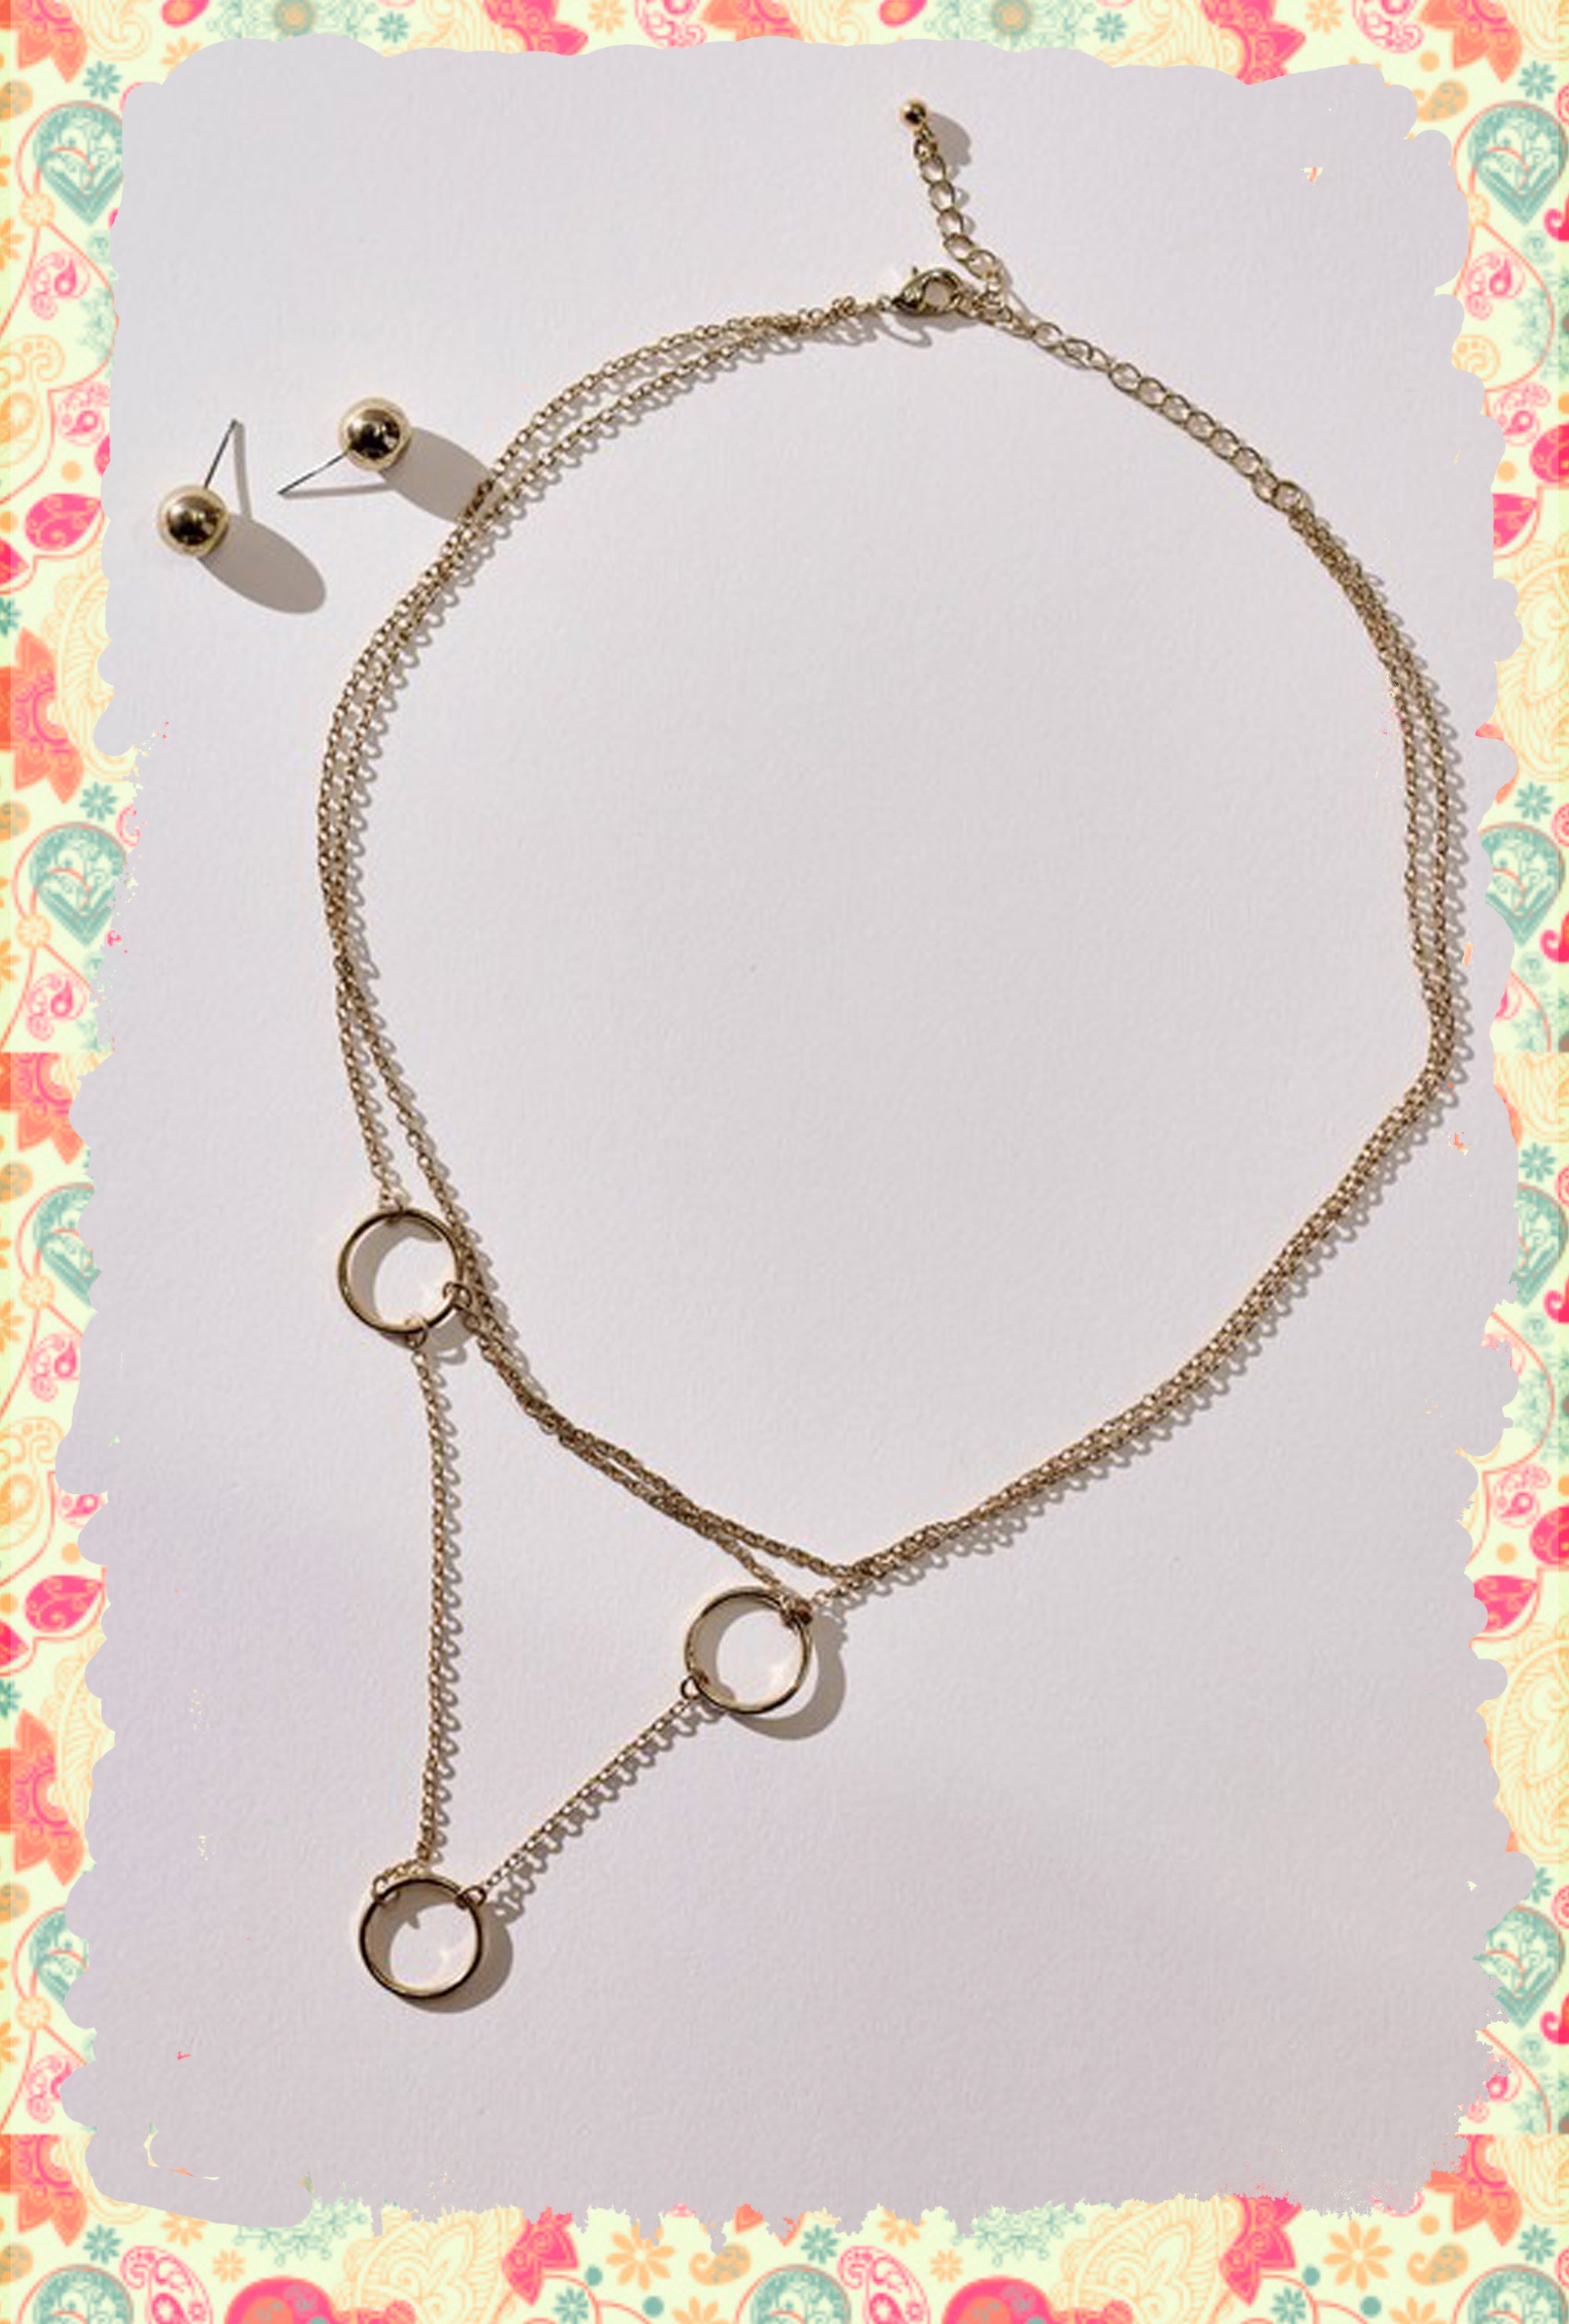 Running in Circles Necklace